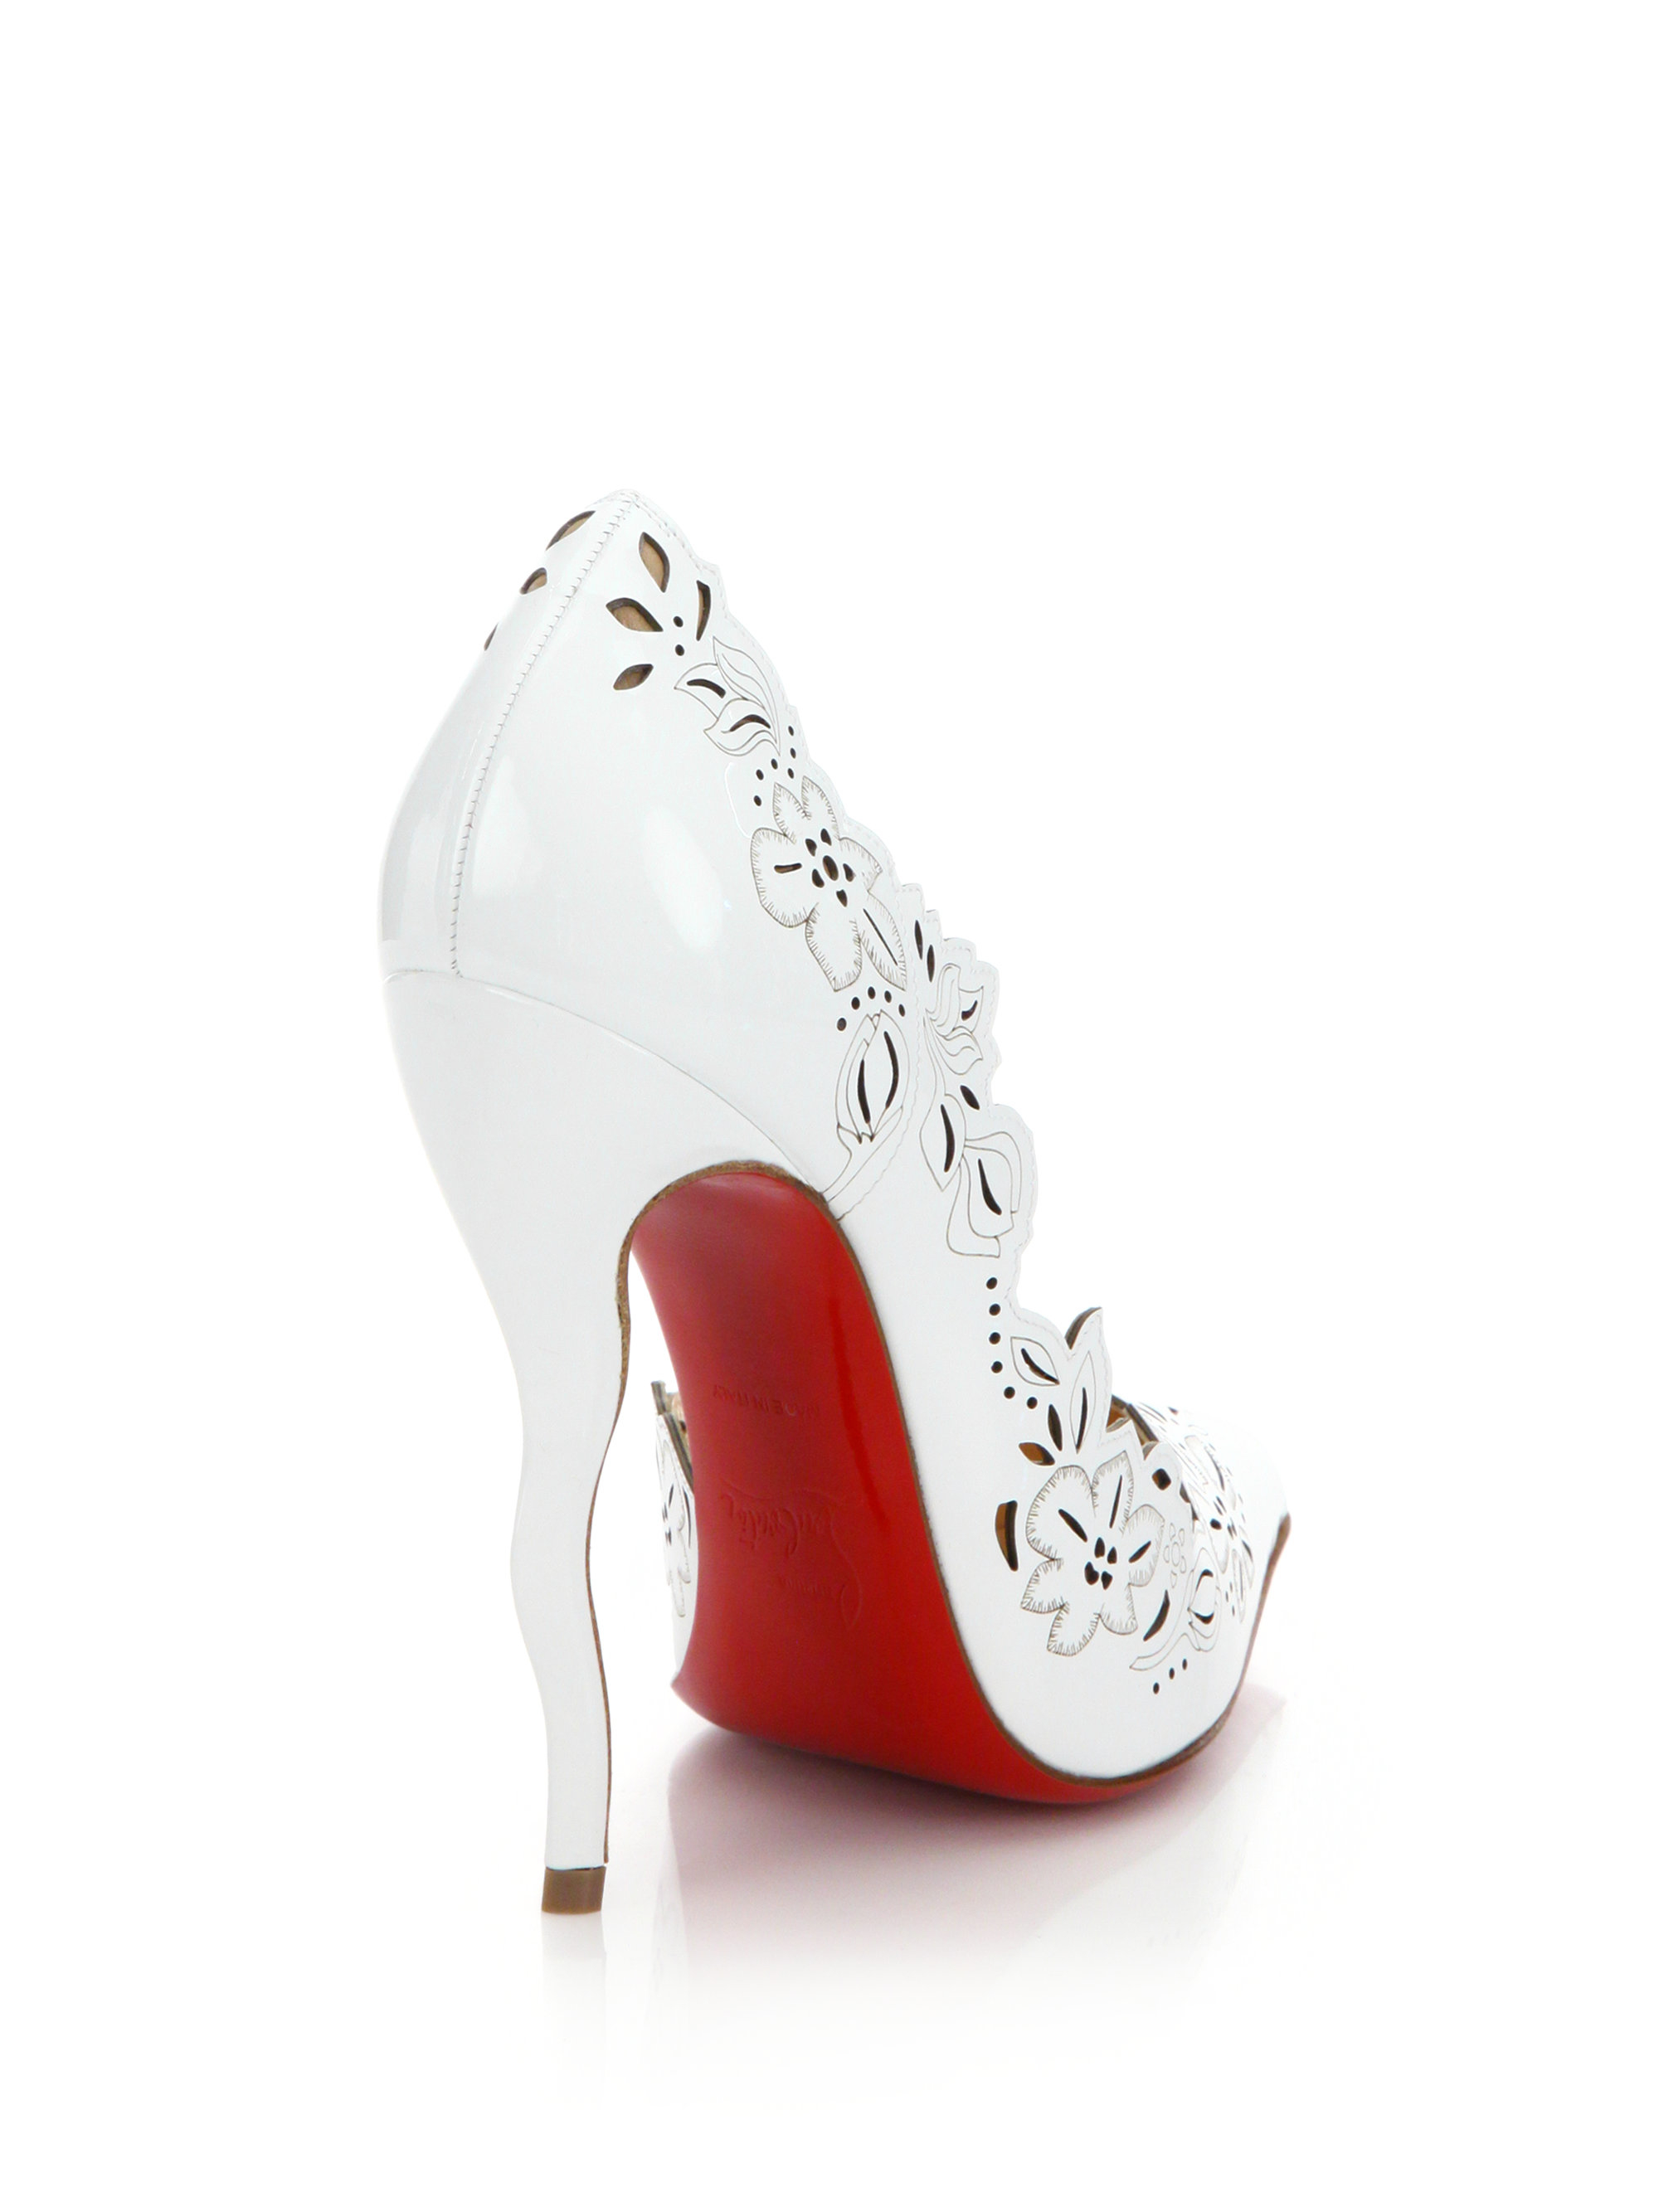 Christian louboutin Beloved Laser-cut Patent Leather Pumps in ...